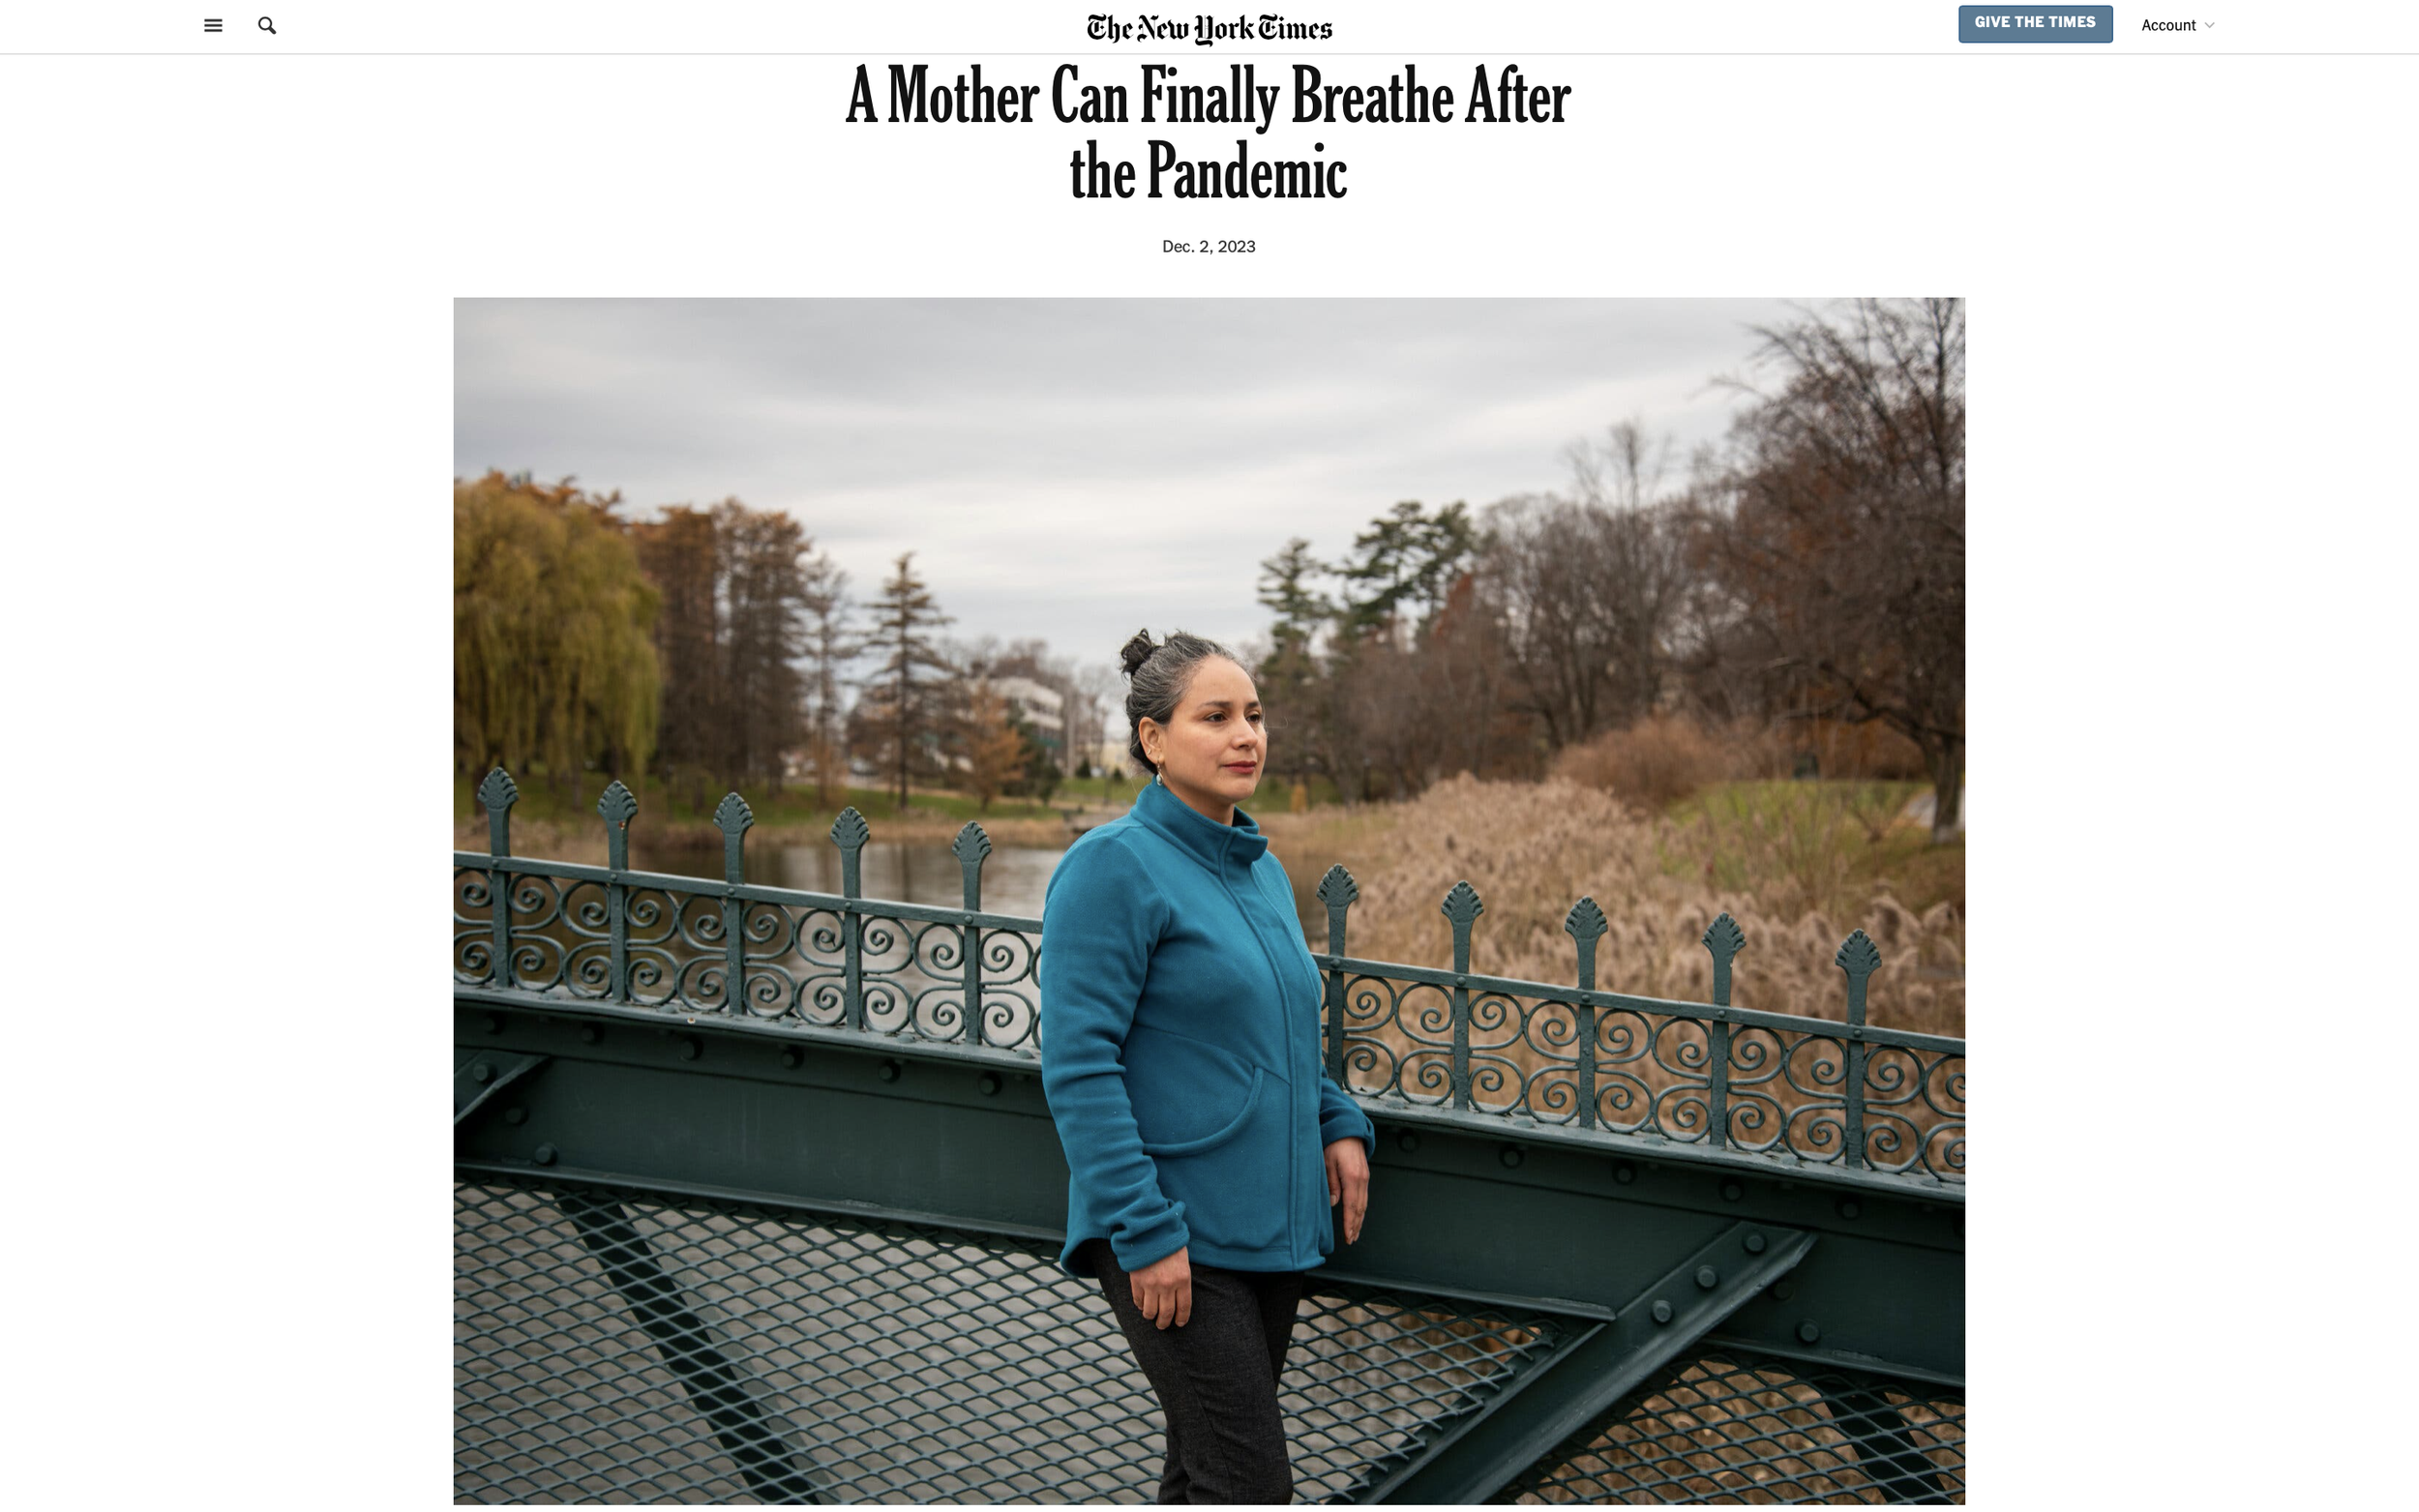  A Mother Can Finally Breathe After the Pandemic, The New York Times, December 2023 